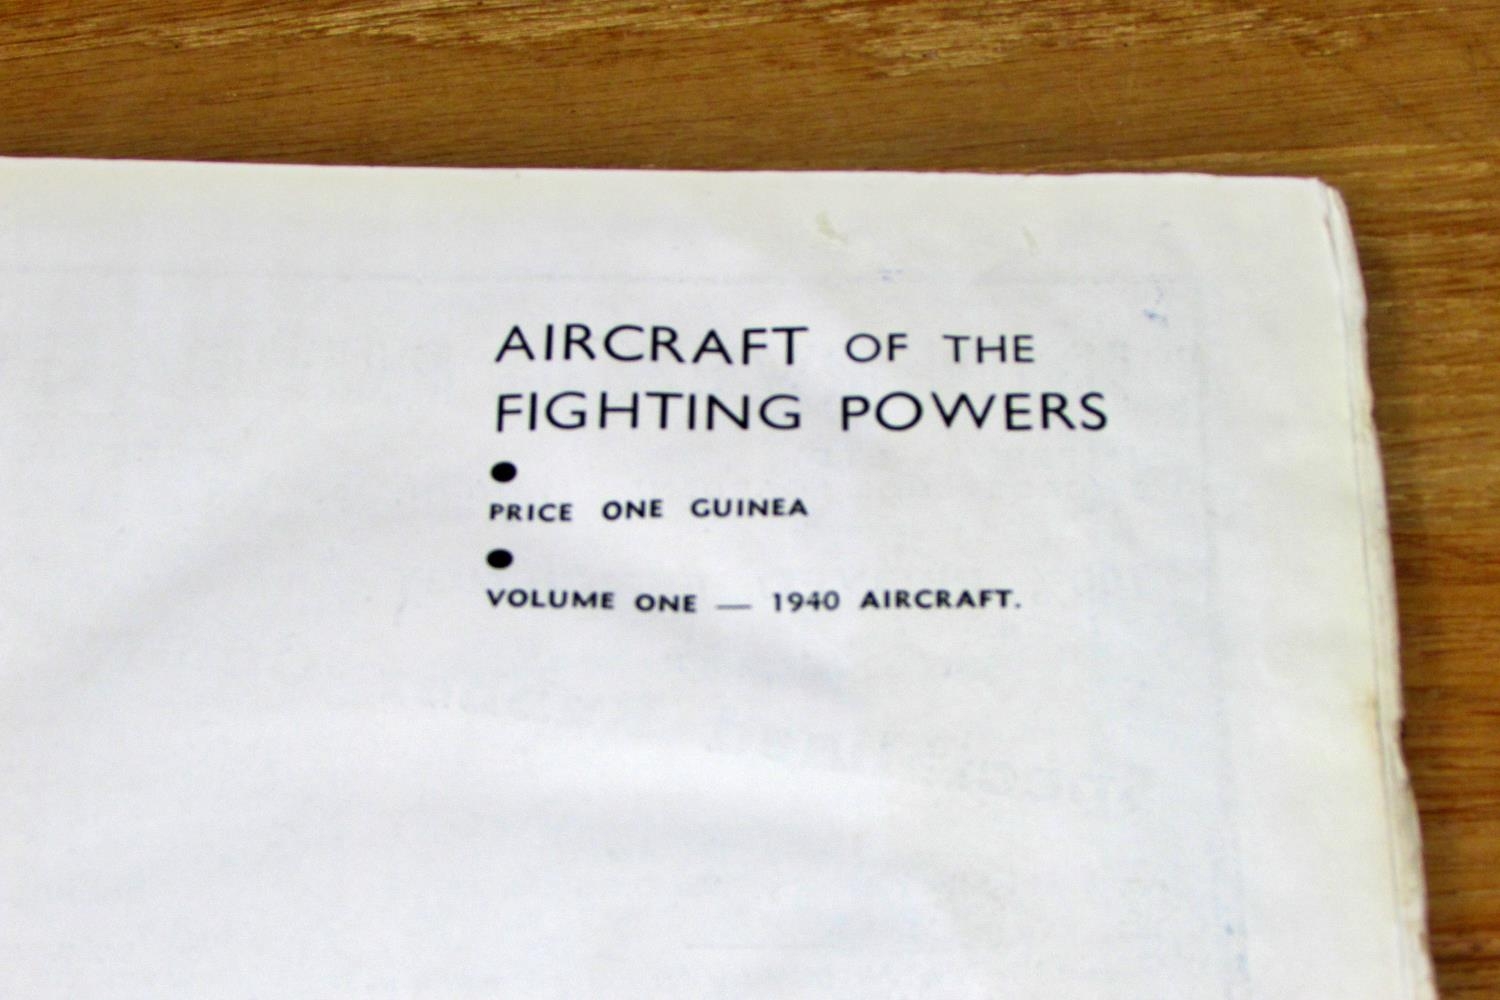 Aircraft of The Fighting Powers (7 volumes) from 1940 - 1946, by Cooper & Thetford together with The - Image 2 of 4